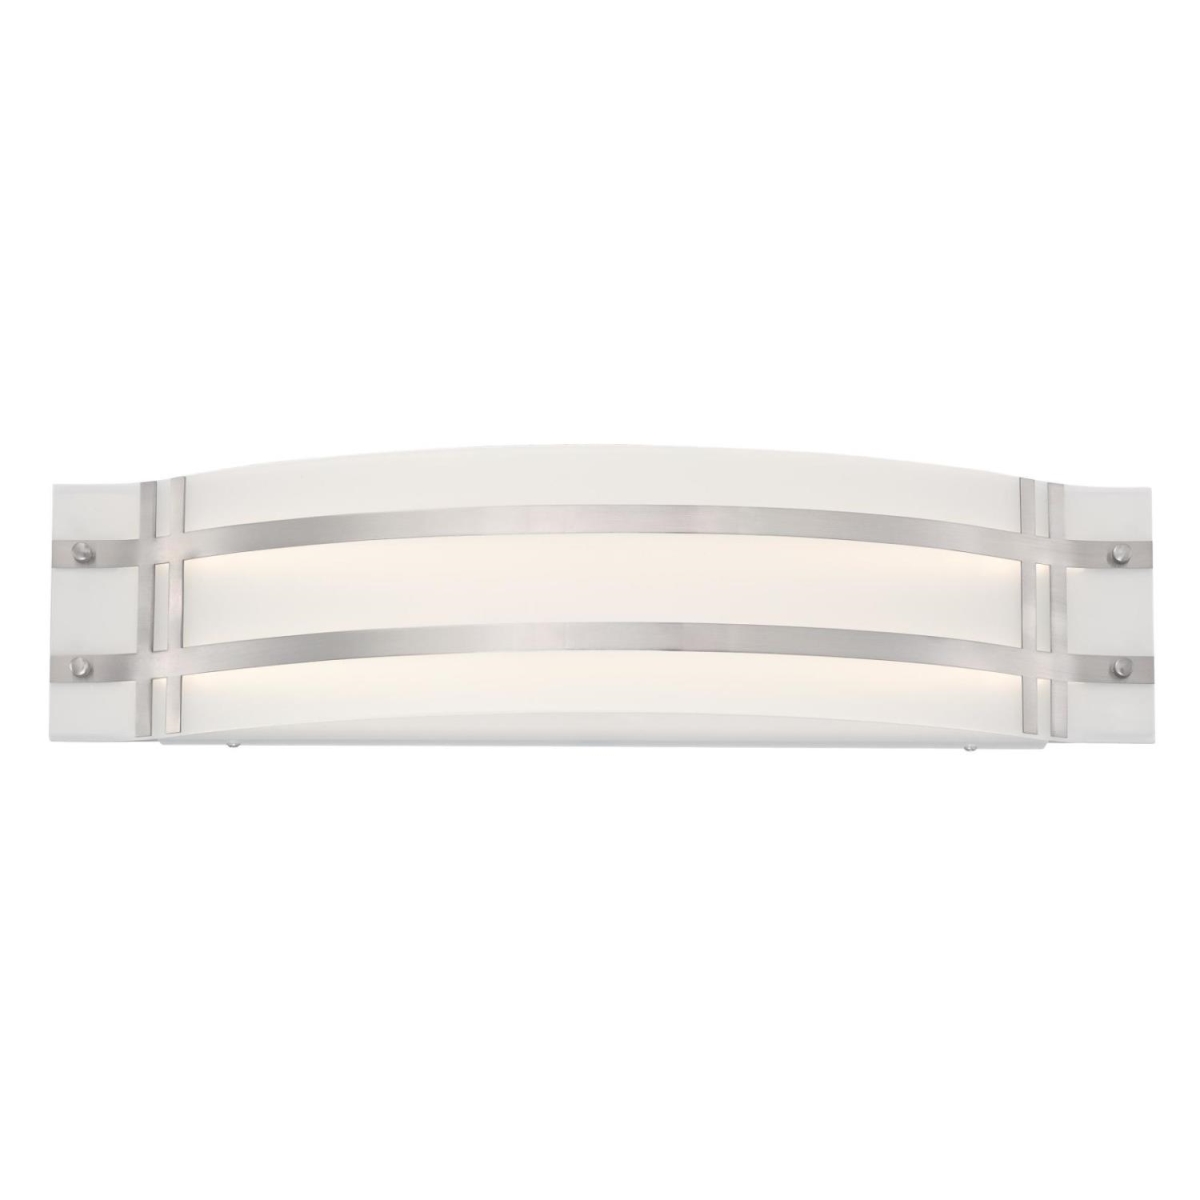 6371800 22 Watt 1 Light Led Wall Fixture With Frosted Glass - Brushed Nickel